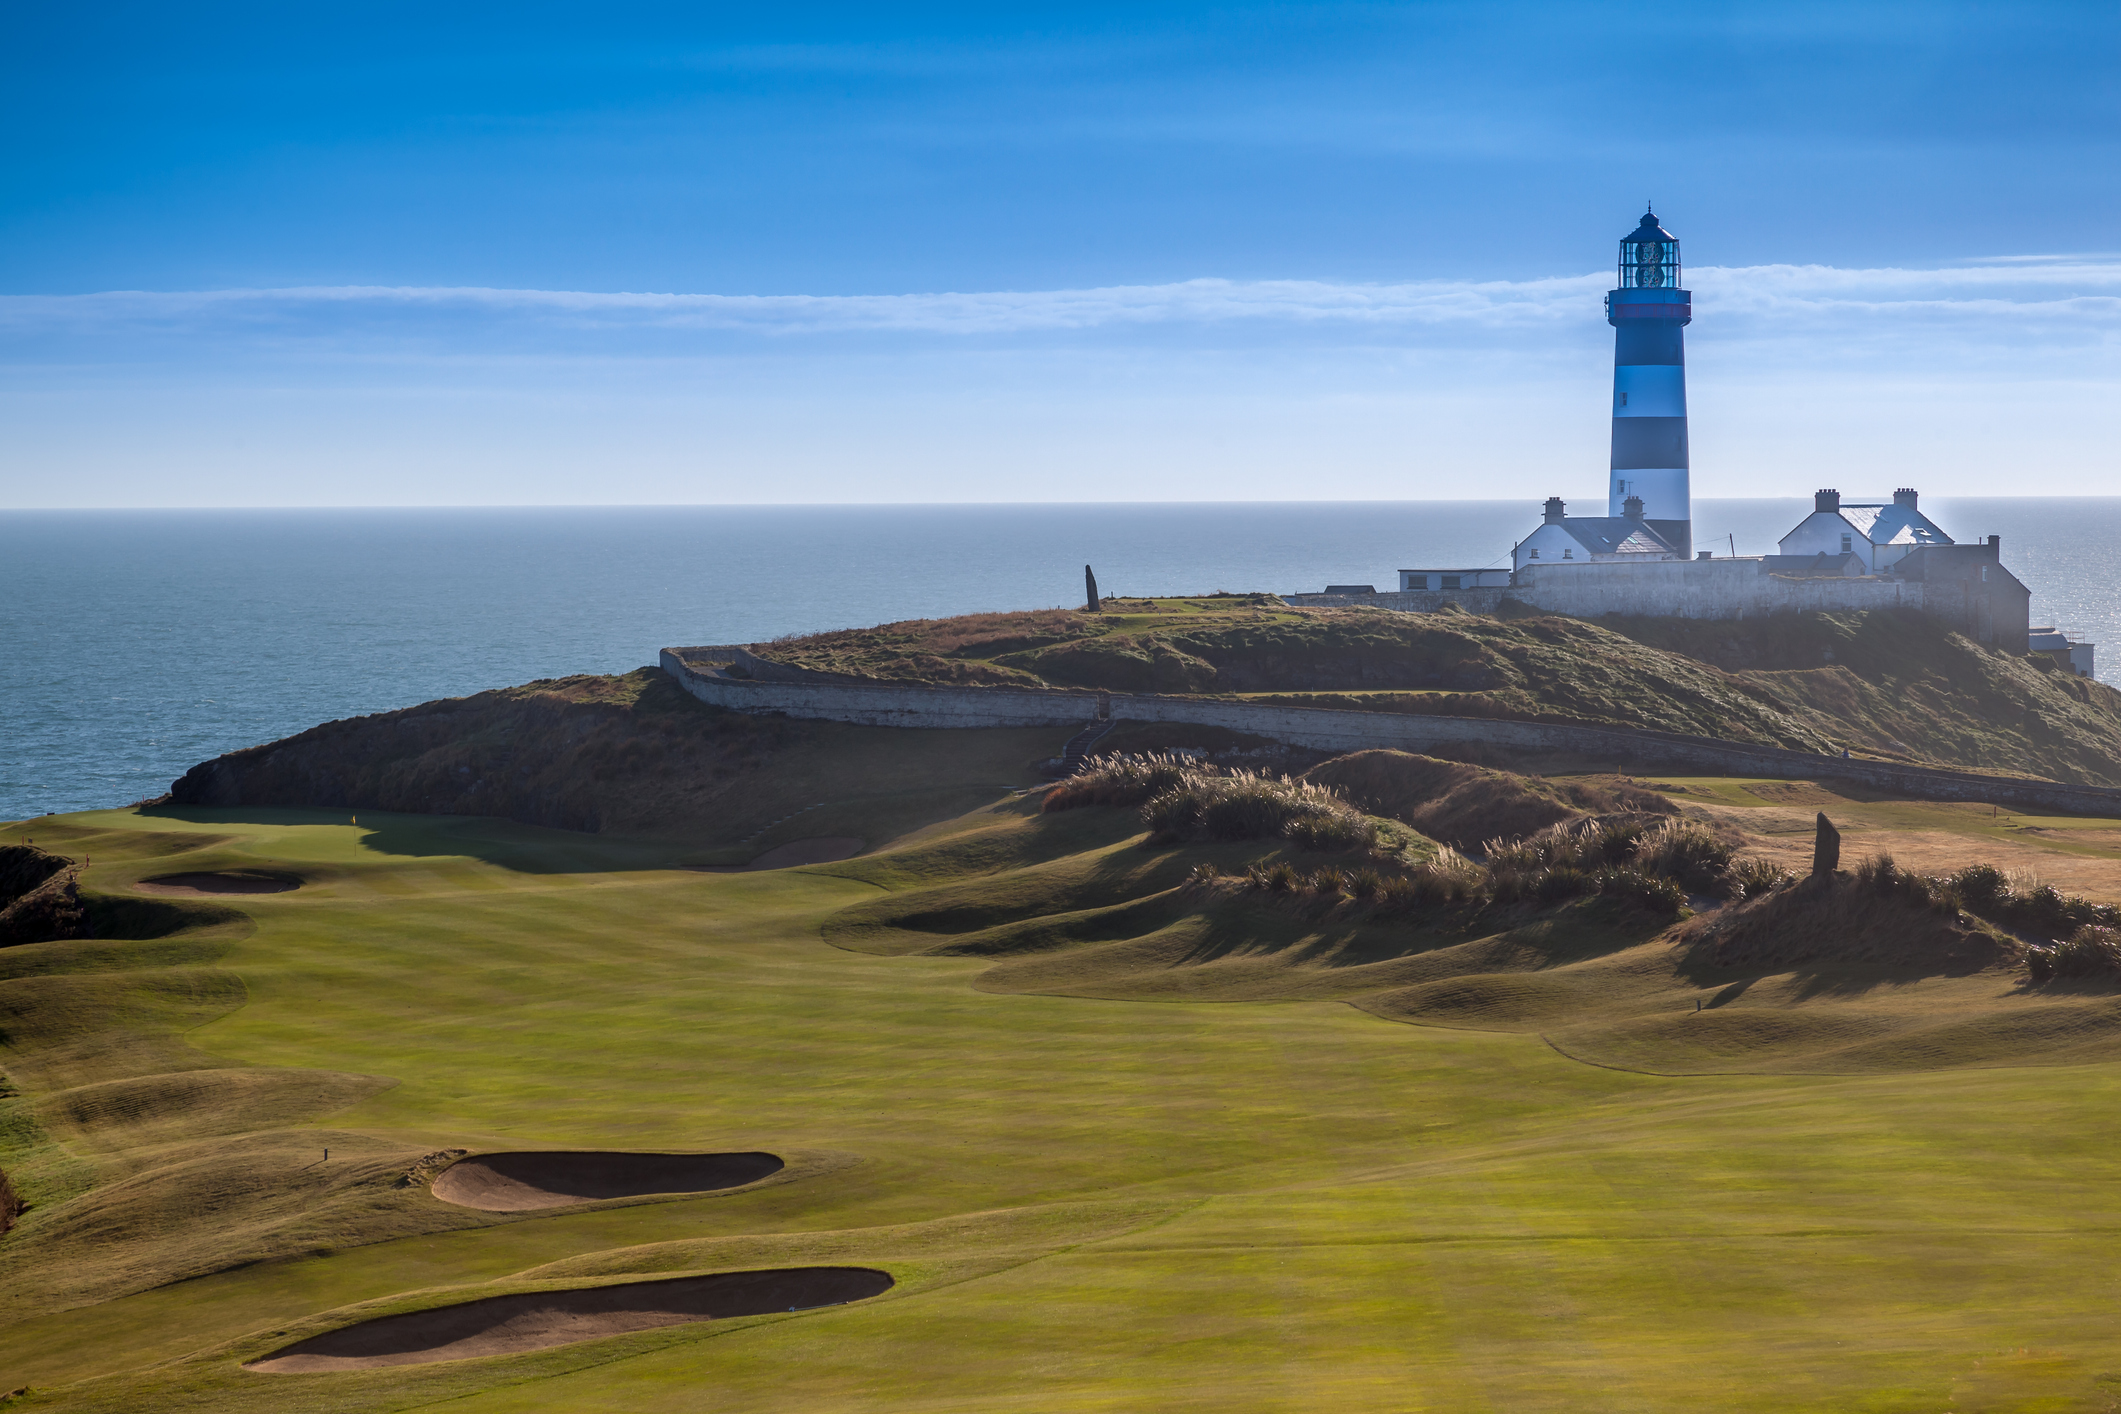 The stunning golf course and lighthouse at the Old Head Of Kinsale in County Cork, Ireland